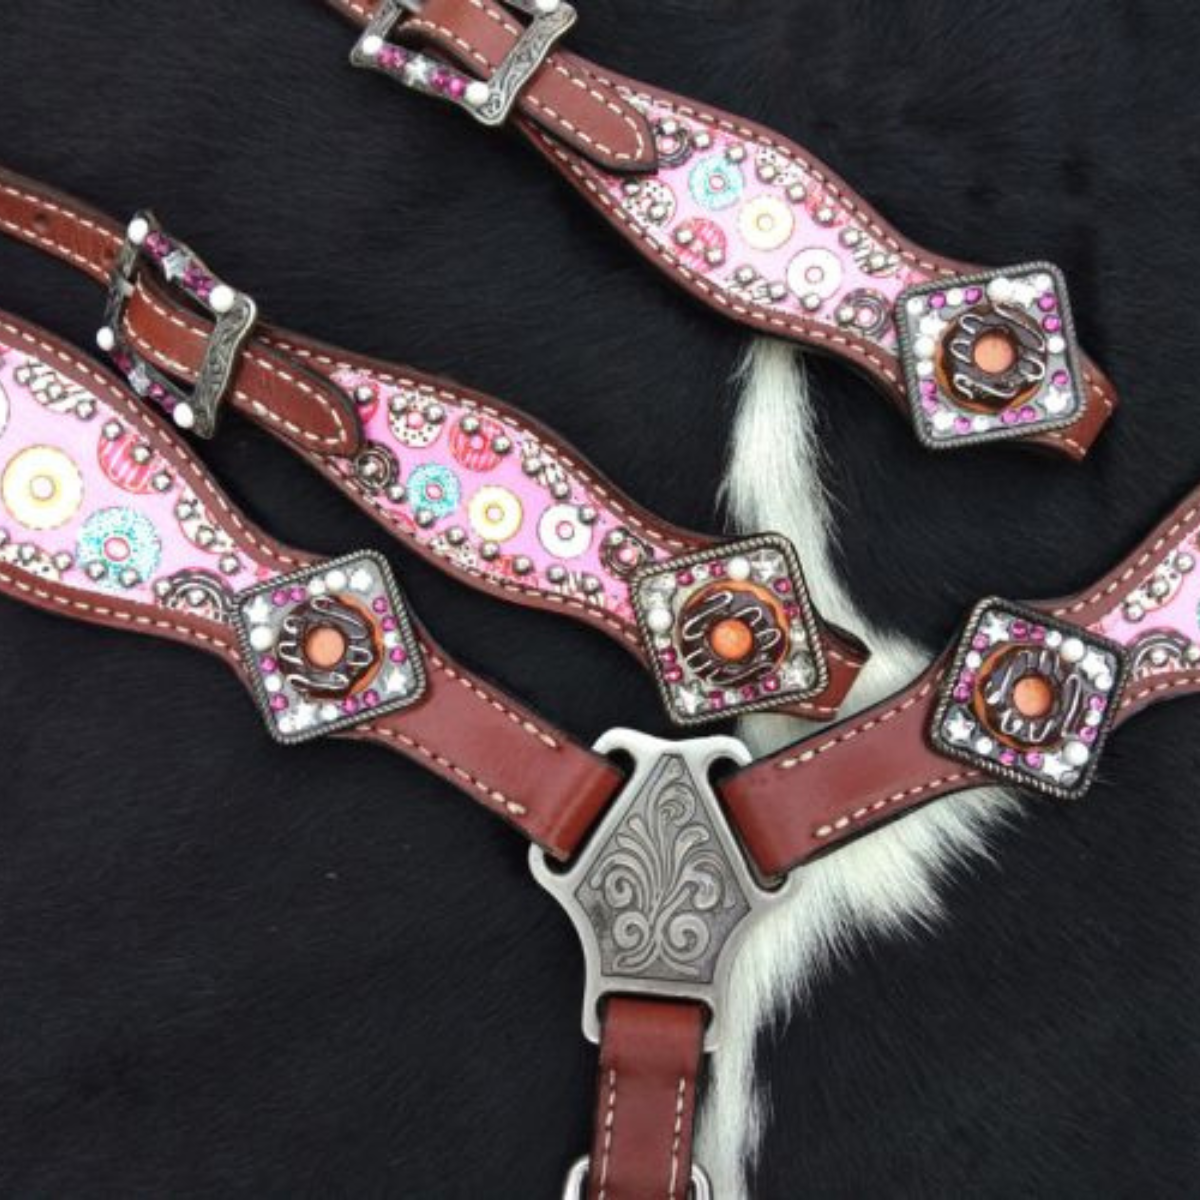 Showman ® PONY SIZE Donut print headstall and breast collar set. - Double T Saddles